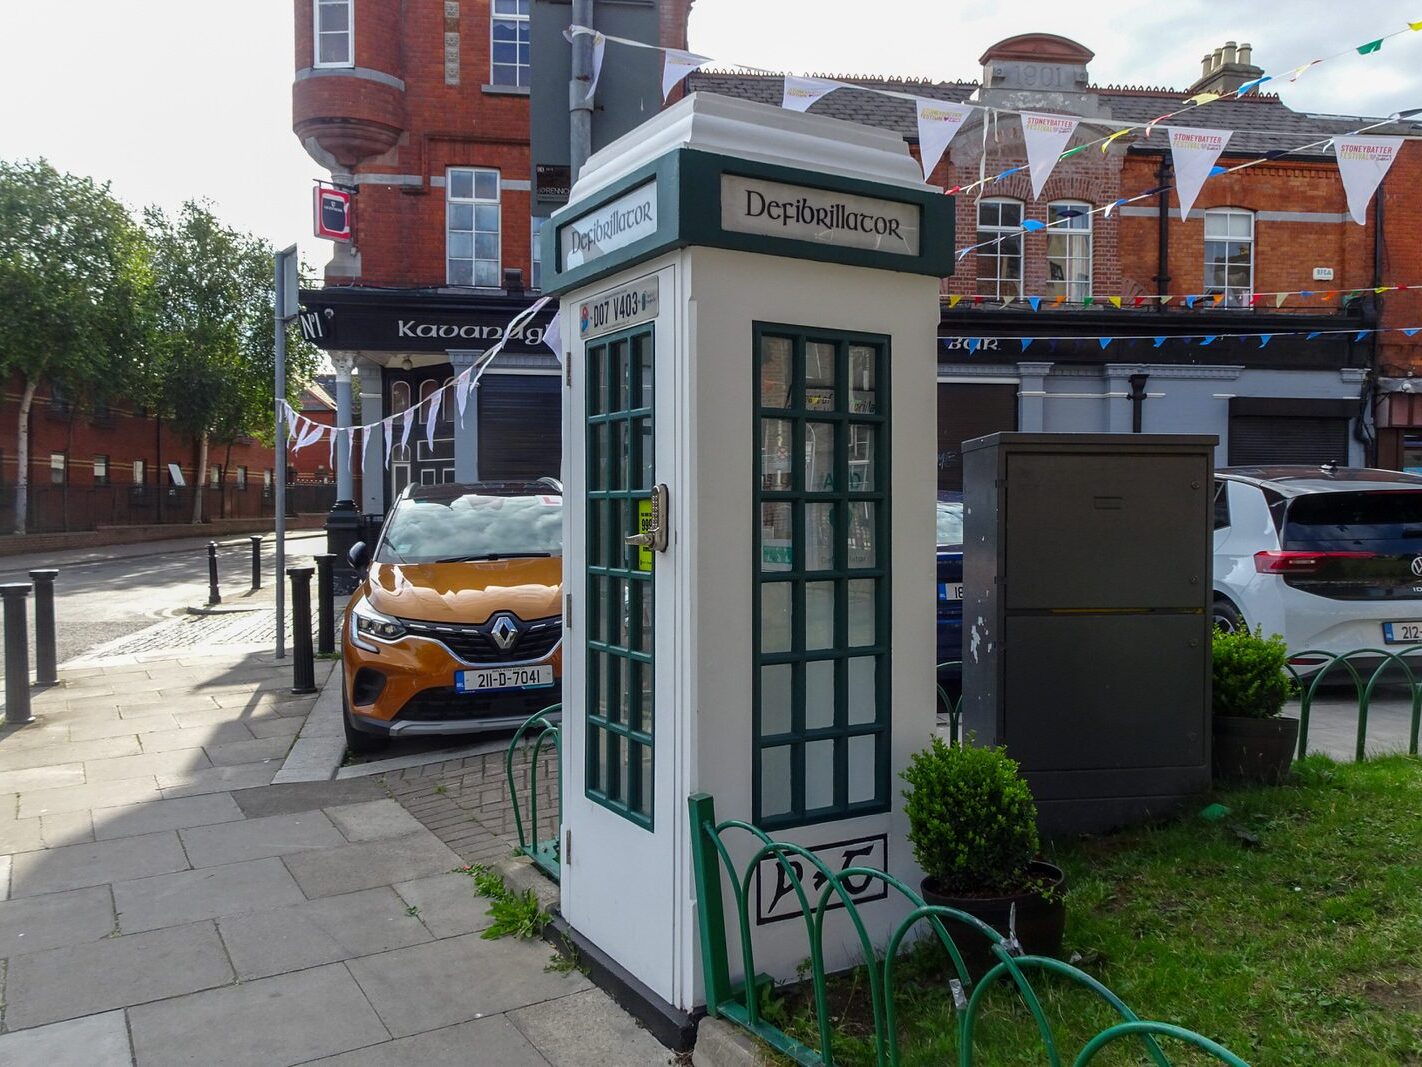 I LIKE THIS IDEA [OLD TELEPHONE KIOSK REPURPOSED AS AN AED] X-236729-1